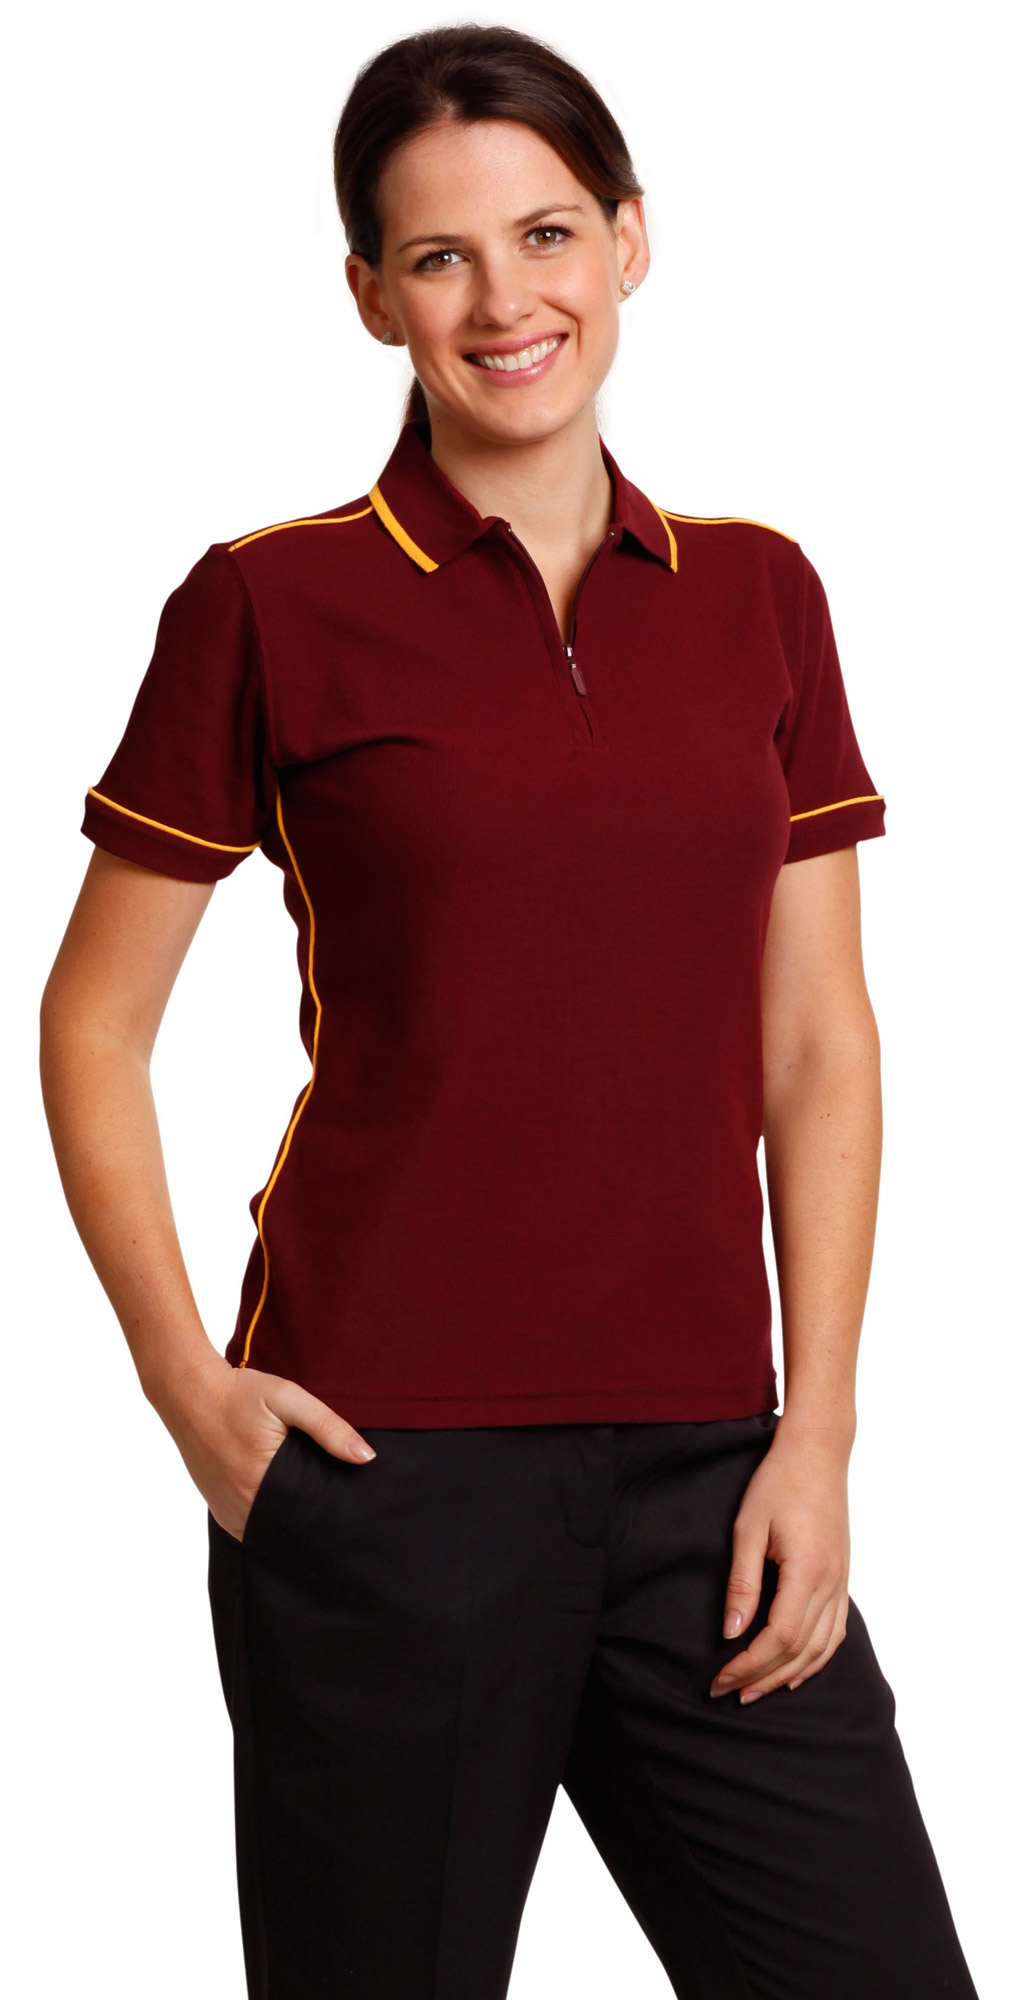 LADIES POLY COTTON MINI-WAFFLE CONTRAST POLO S/S